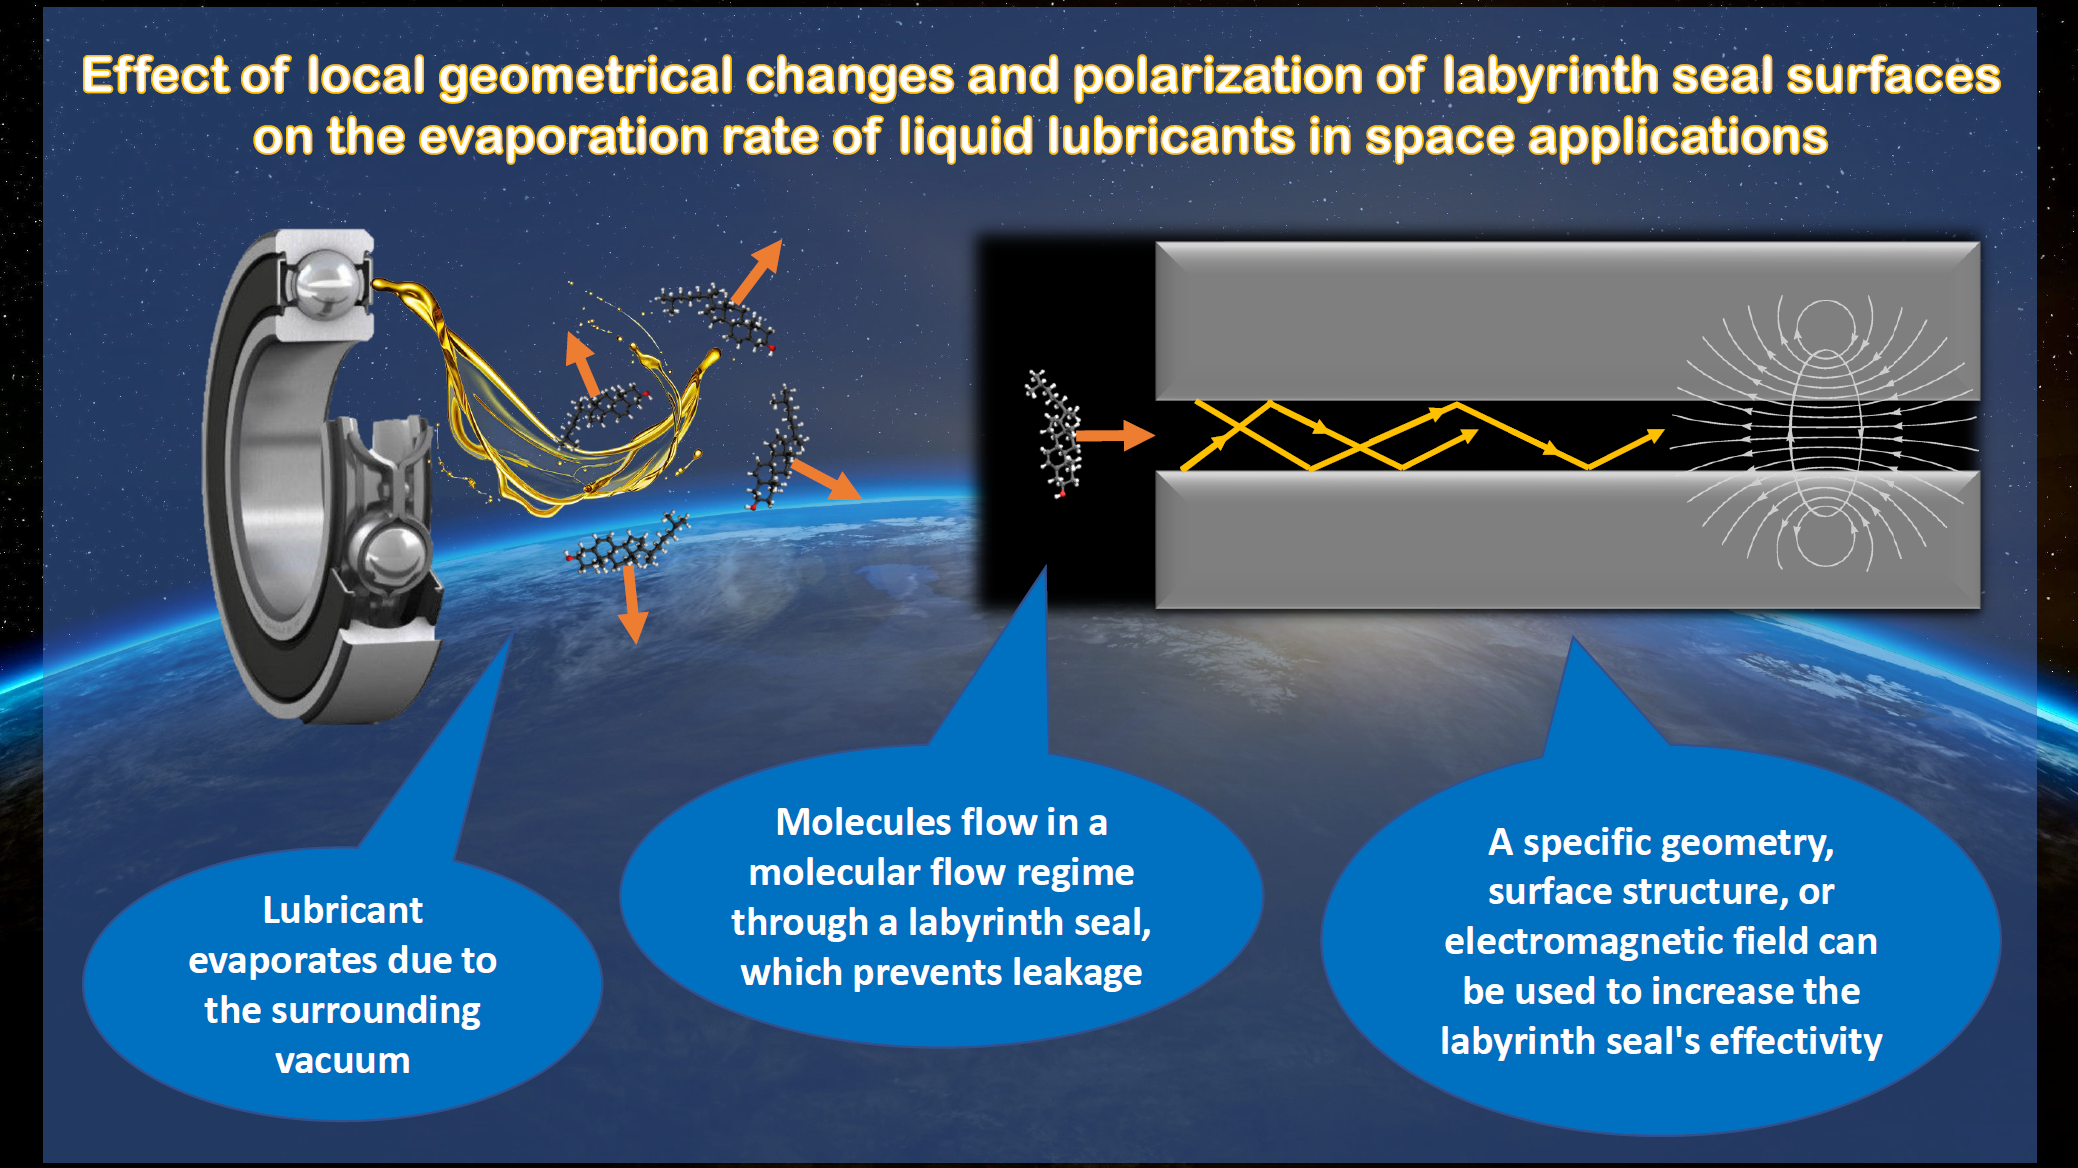 Effect of local geometrical changes and polarization of labyrinth seal surfaces on the evaporation rate of liquid lubricants in space applications.